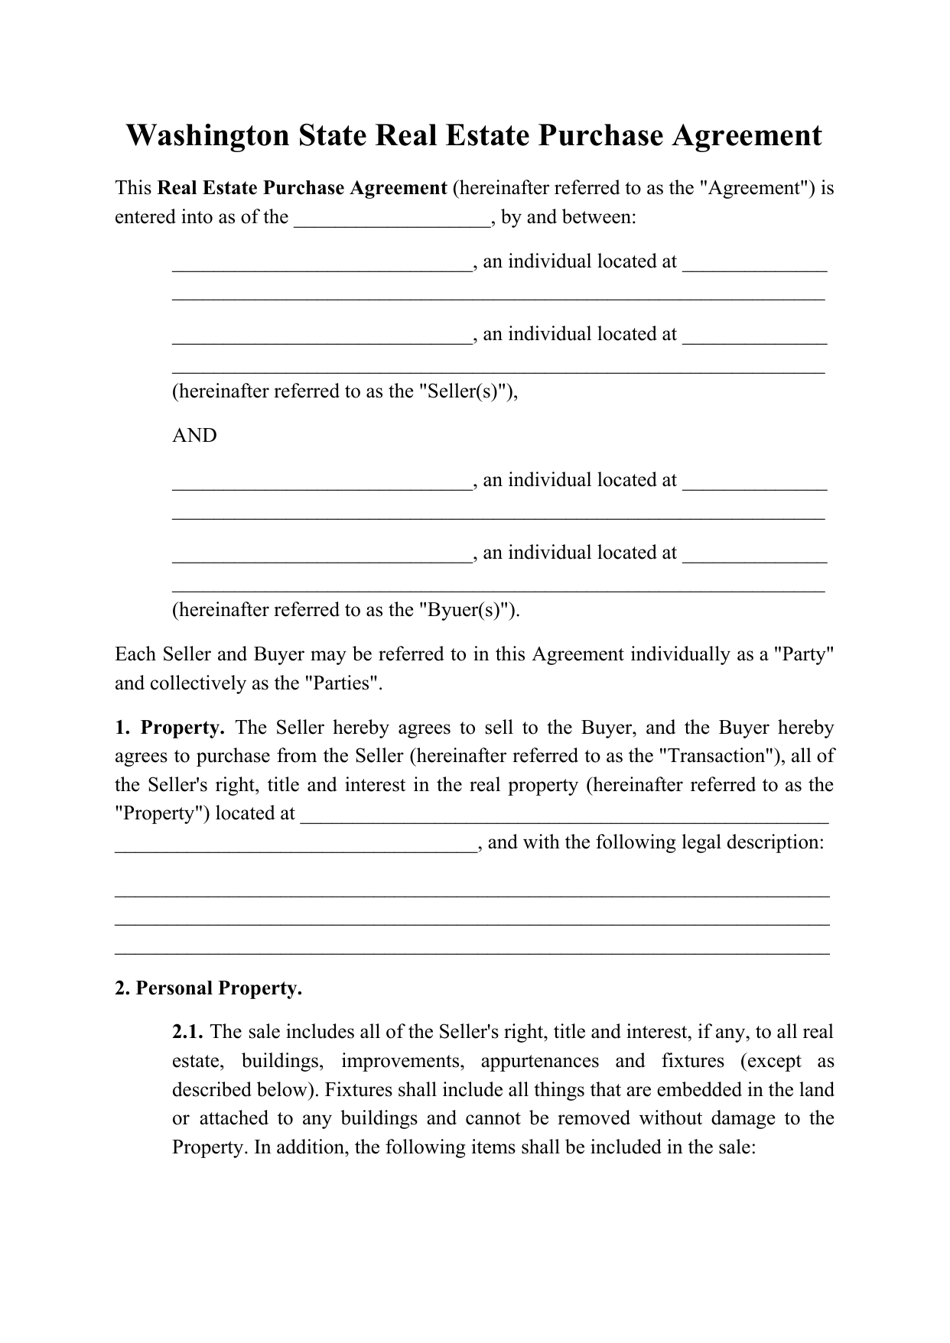 washington-real-estate-purchase-agreement-template-fill-out-sign